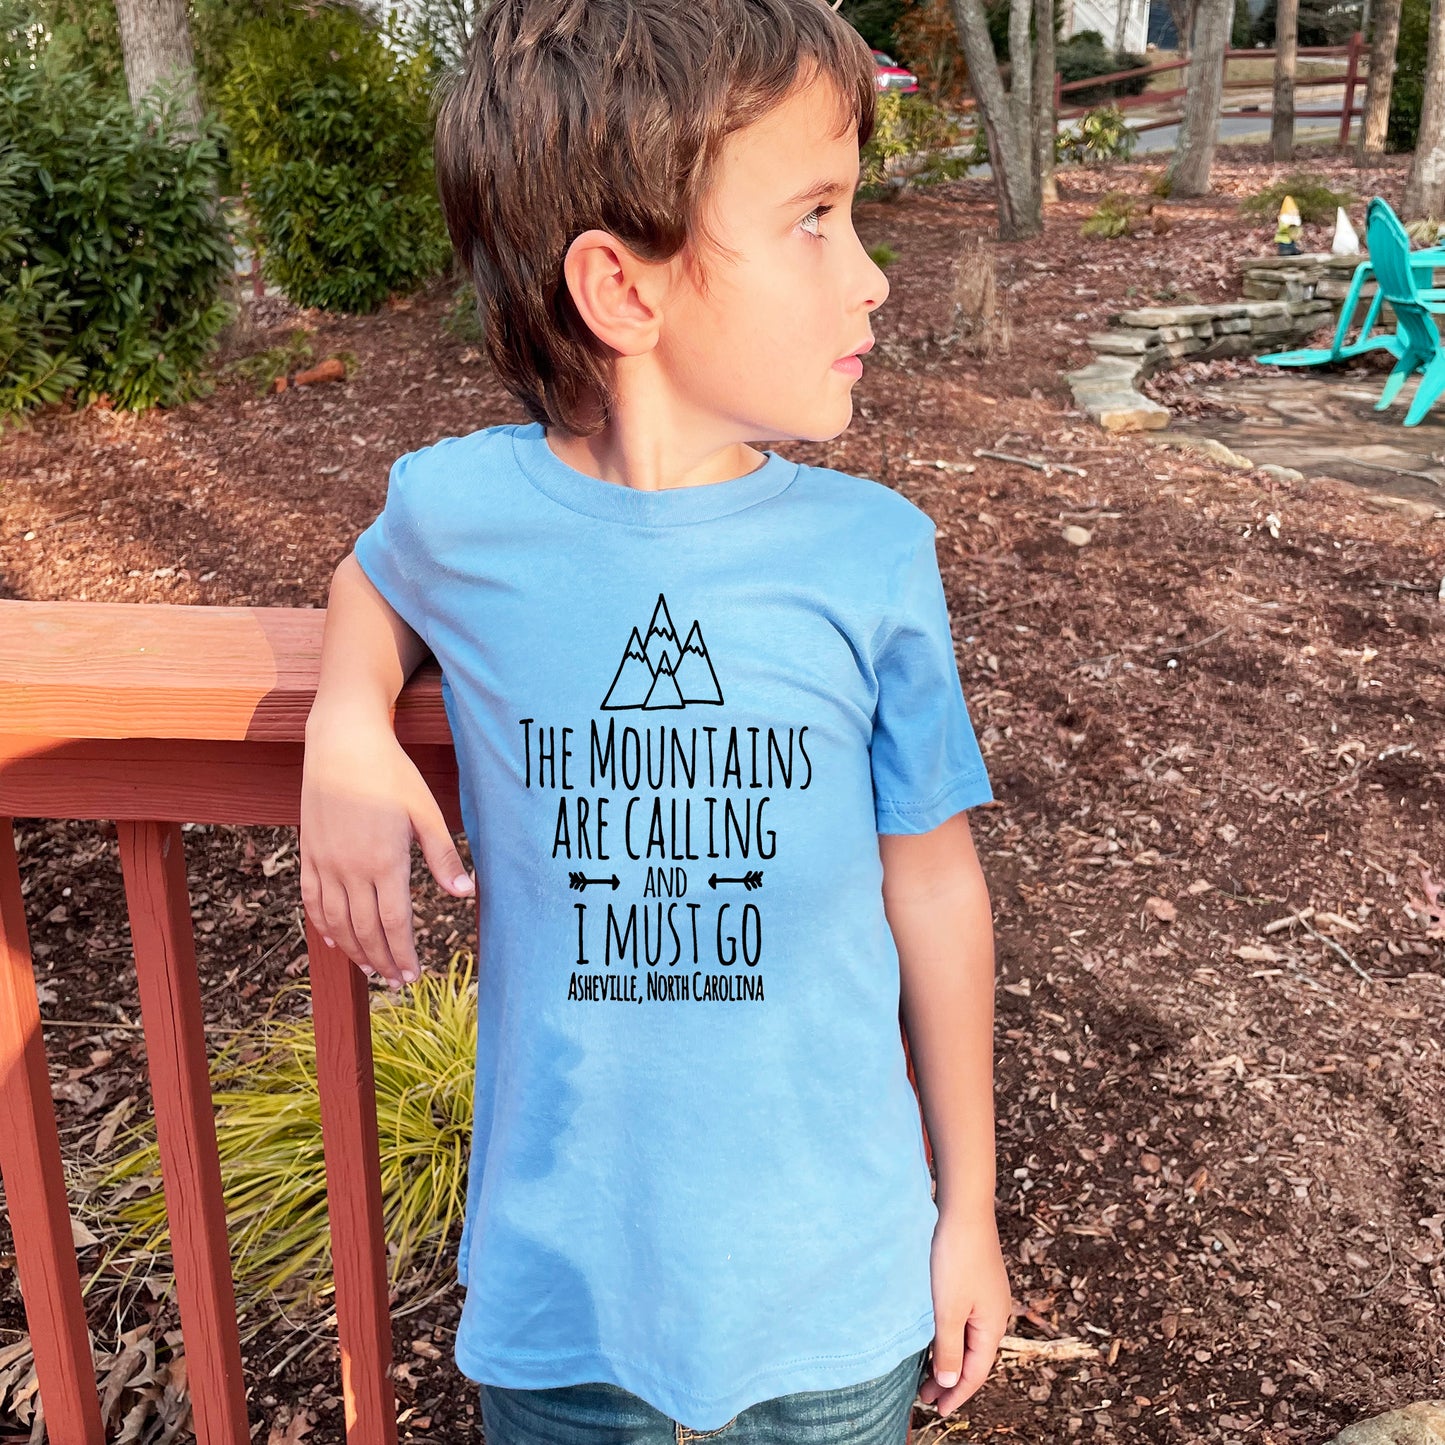 The Mountains Are Calling And I Must Go, Asheville North Carolina - Kid's Tee - Columbia Blue or Lavender